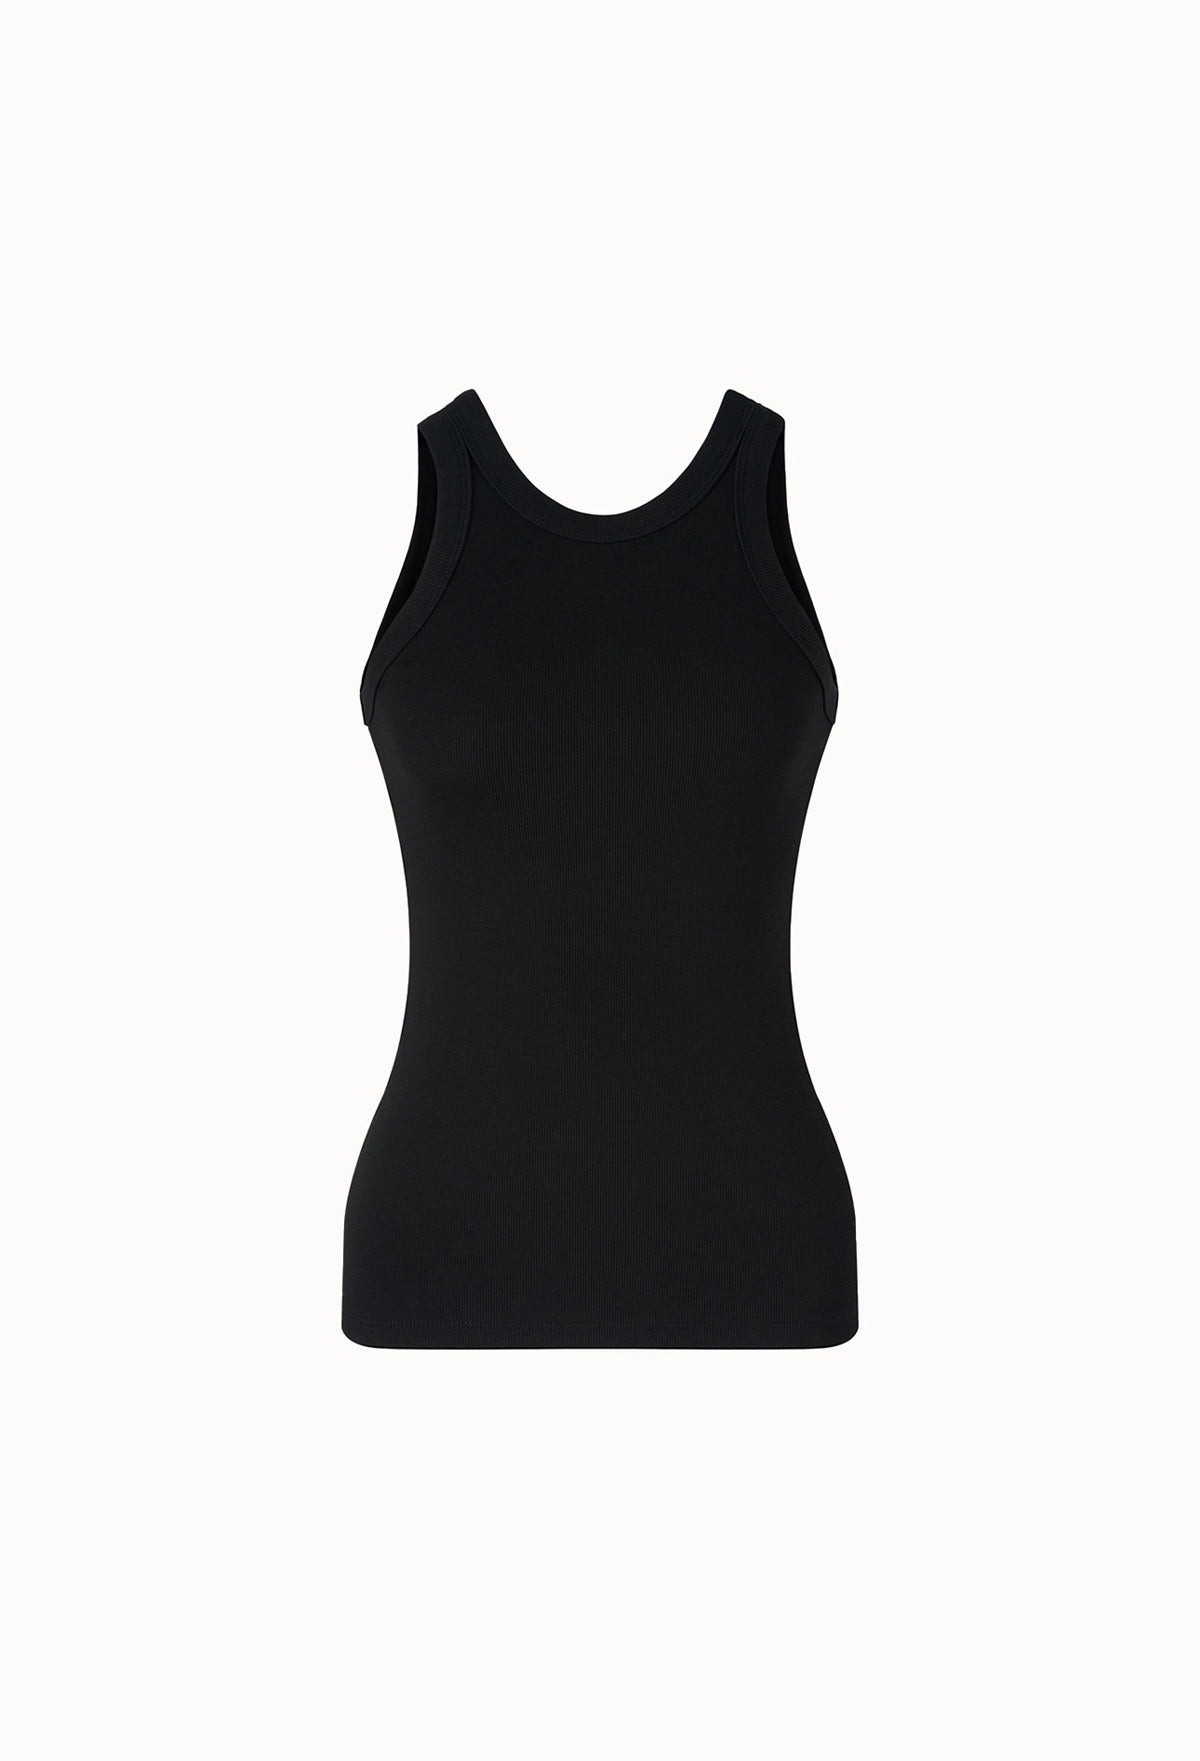 Curved Sleeveless Top In Black